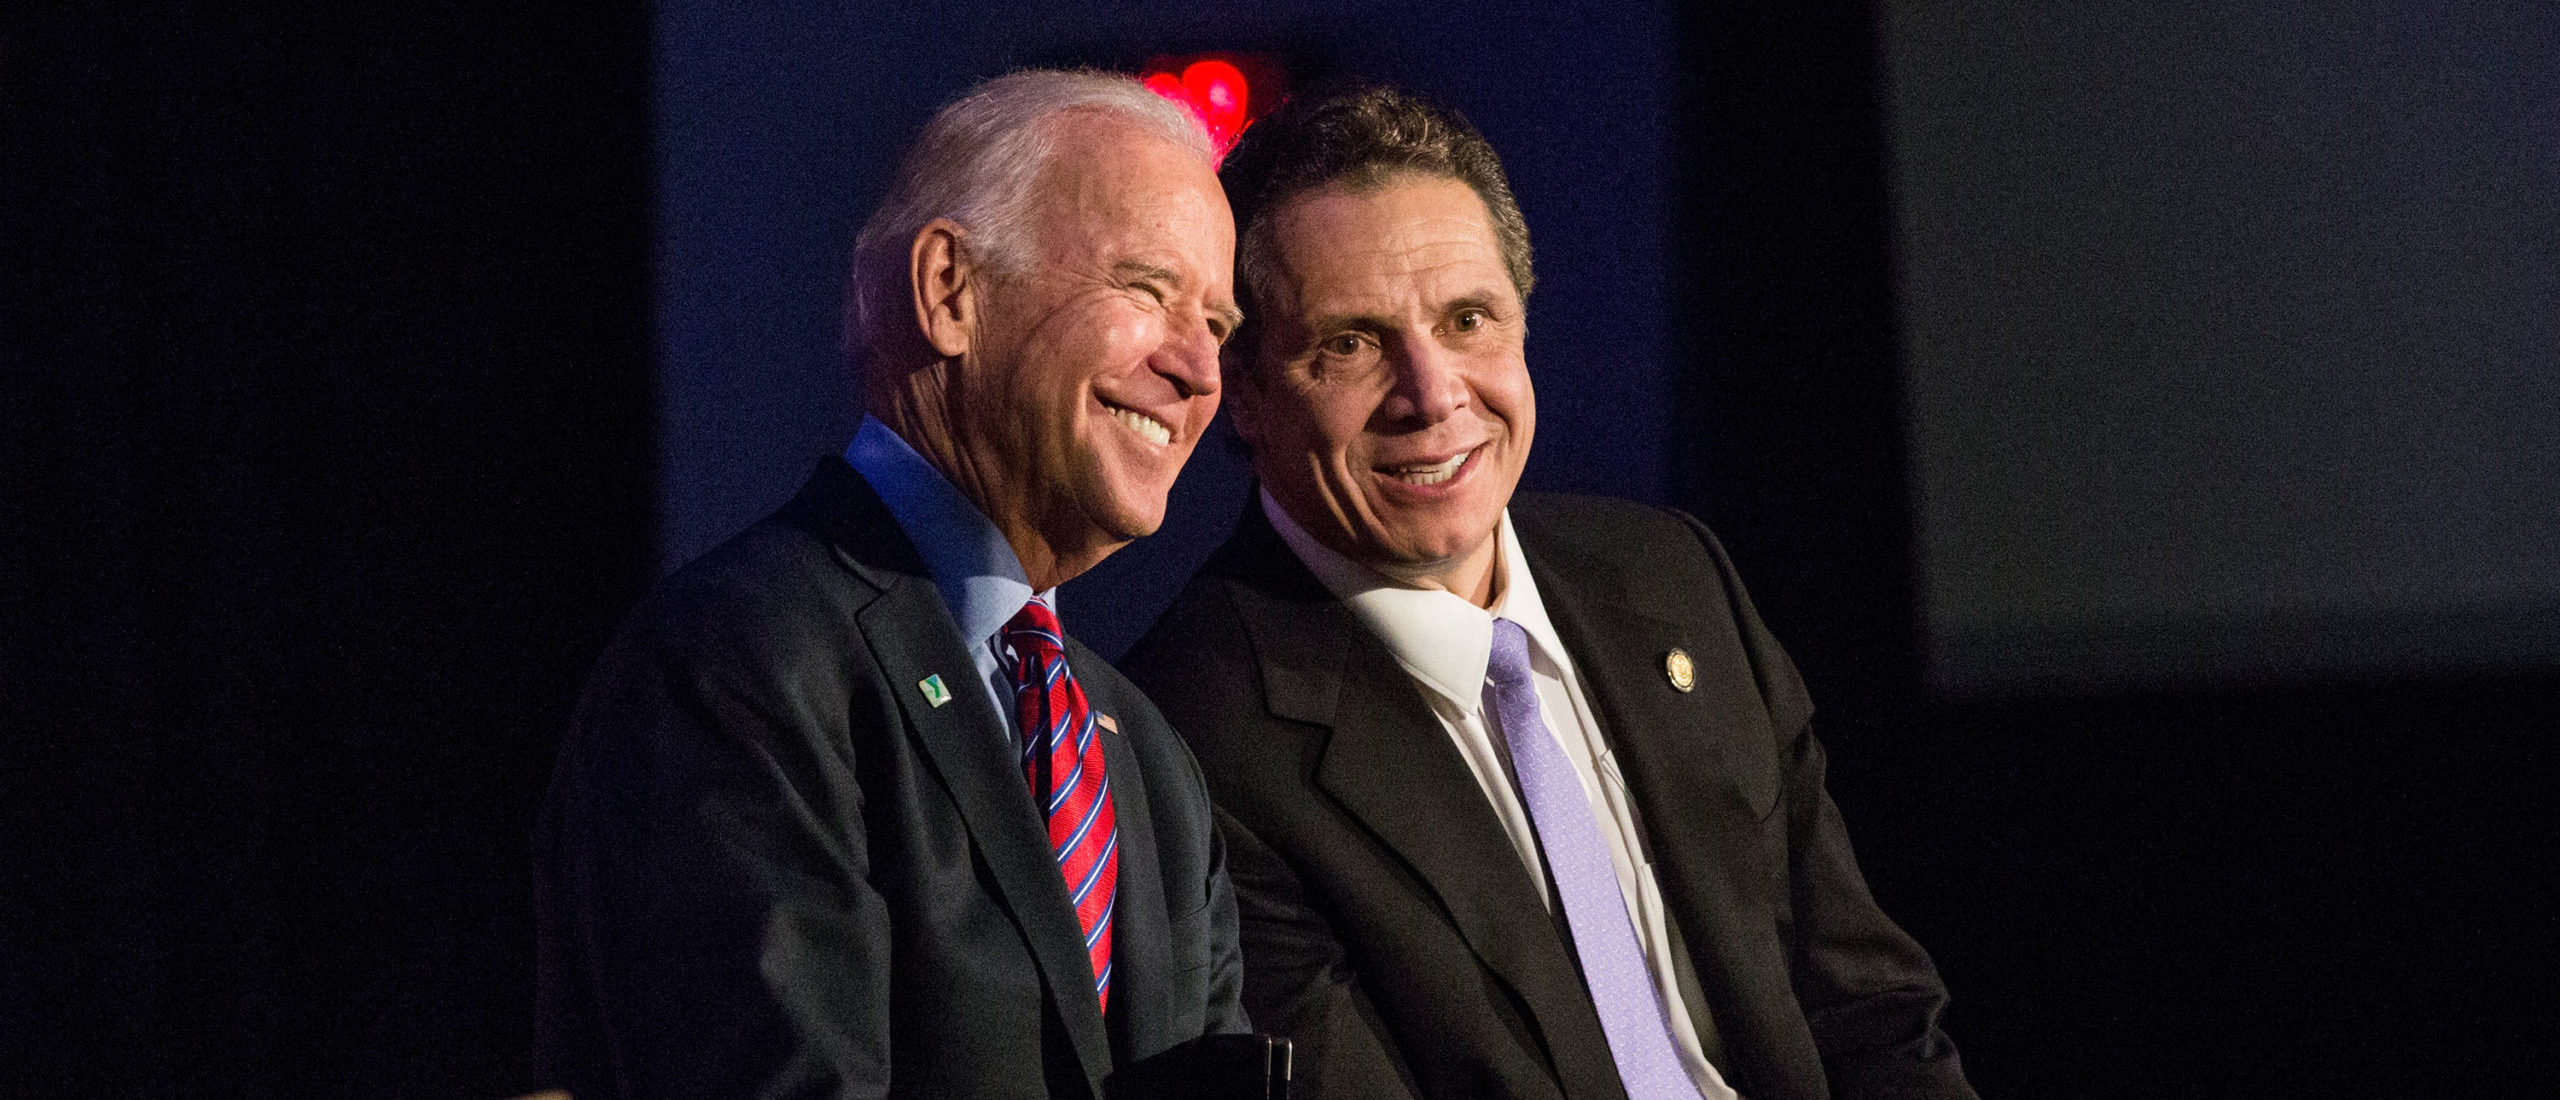 NEW YORK, NY - JANUARY 29: U.S. Vice President Joe Biden (L) and New York Governor Andrew Cuomo attend a rally for paid family leave on January 29, 2016 in New York City. The rally was attended by many union workers and included speakers Vice President Joe Biden, New York Governor Andrew Cuomo, U.S. Representative Carolyn Maloney (D-NY 12th District) and former model Christy Turlington. (Photo by Andrew Burton/Getty Images)